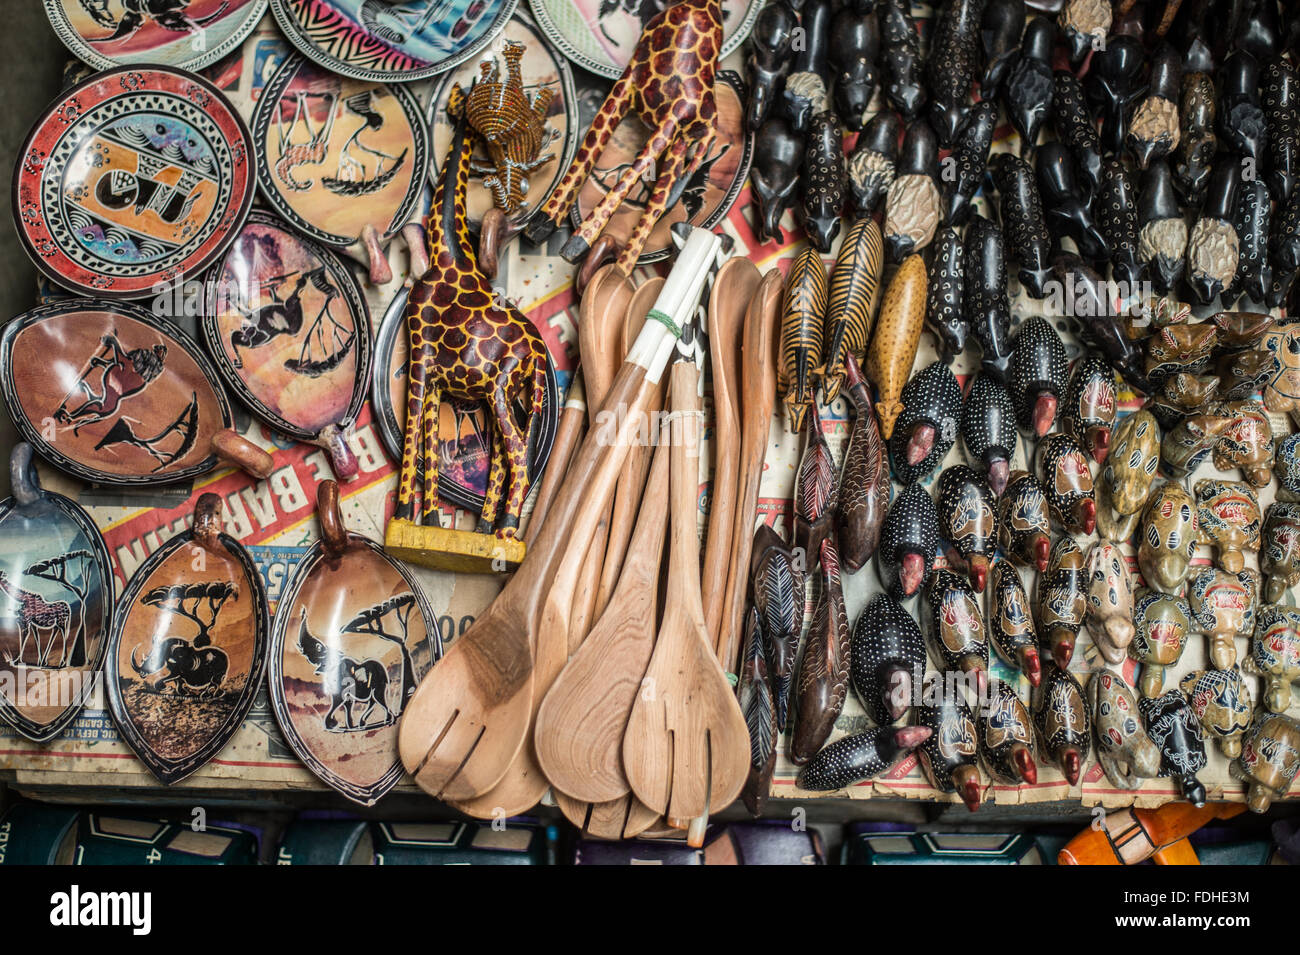 Souvenirs for sale at the Manzini Wholesale Produce and Craft Market in Swaziland, Africa. Stock Photo